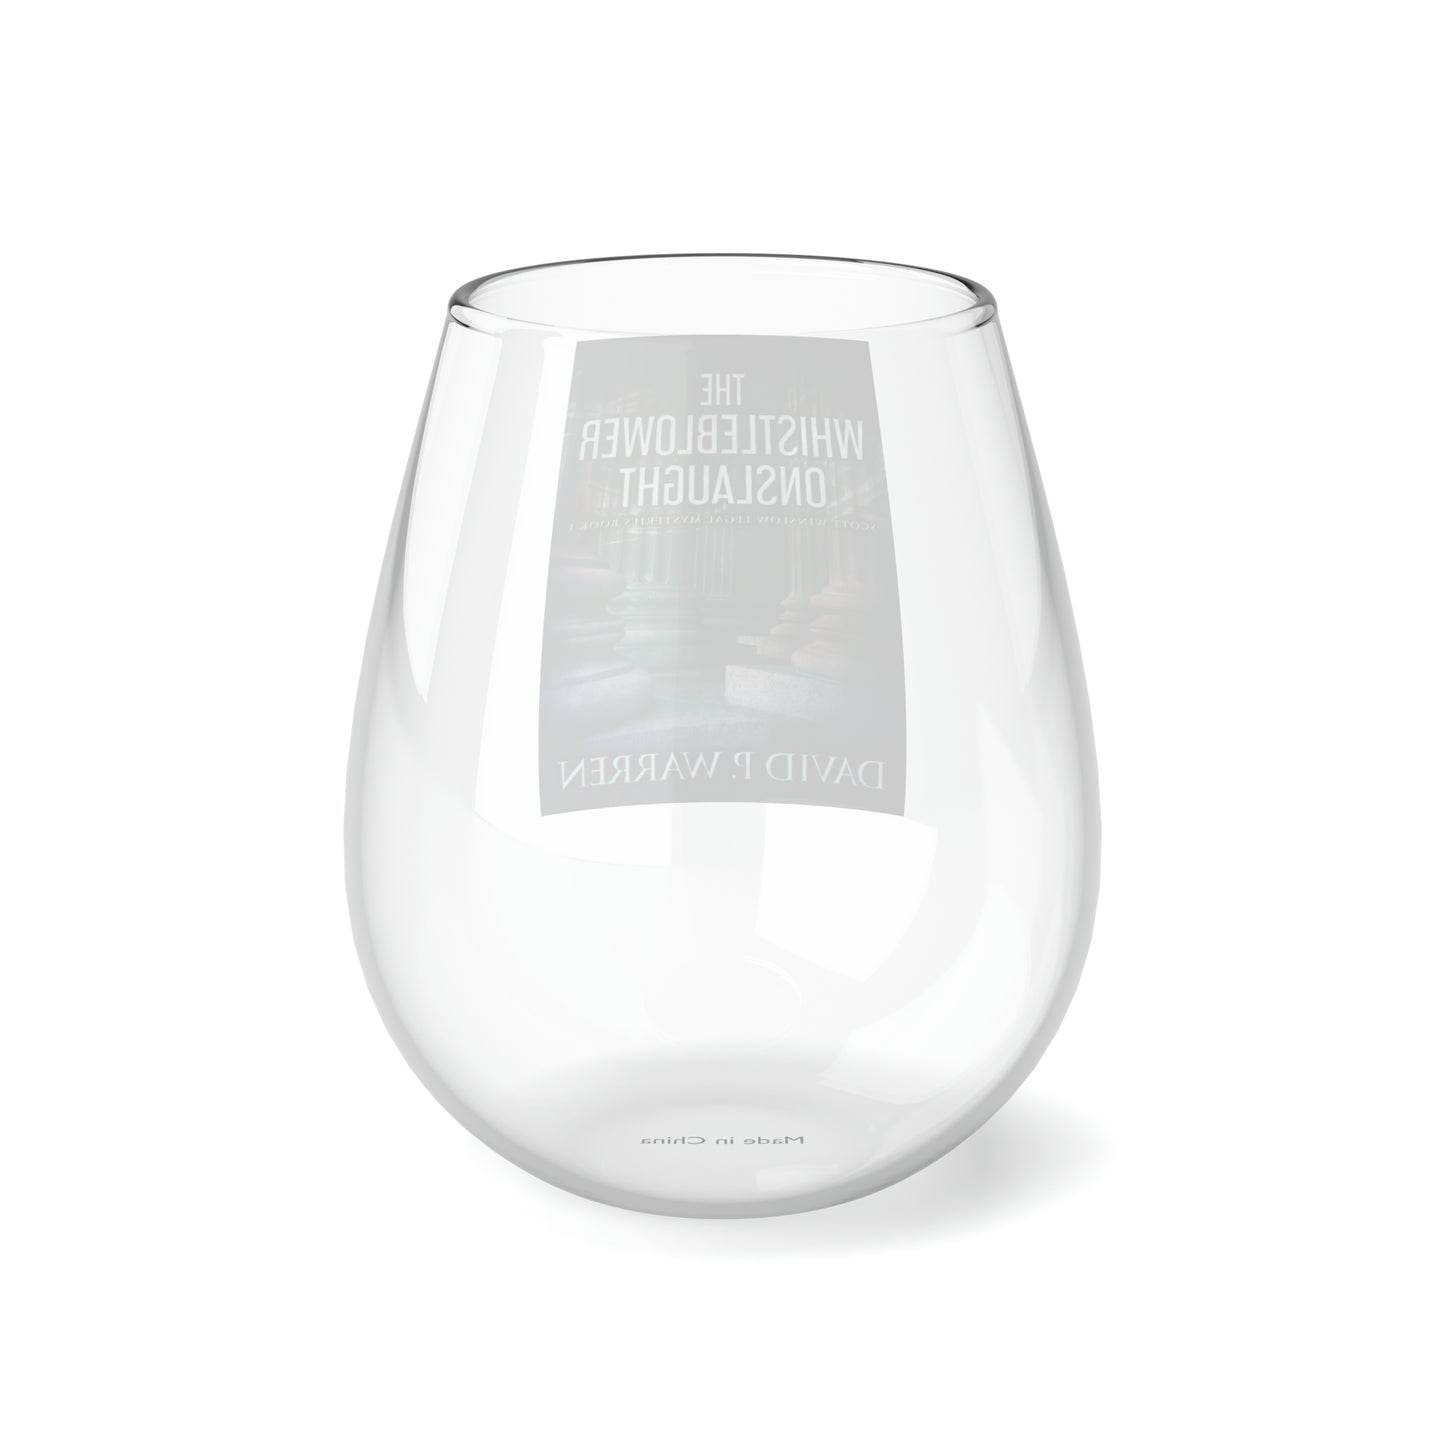 The Whistleblower Onslaught - Stemless Wine Glass, 11.75oz